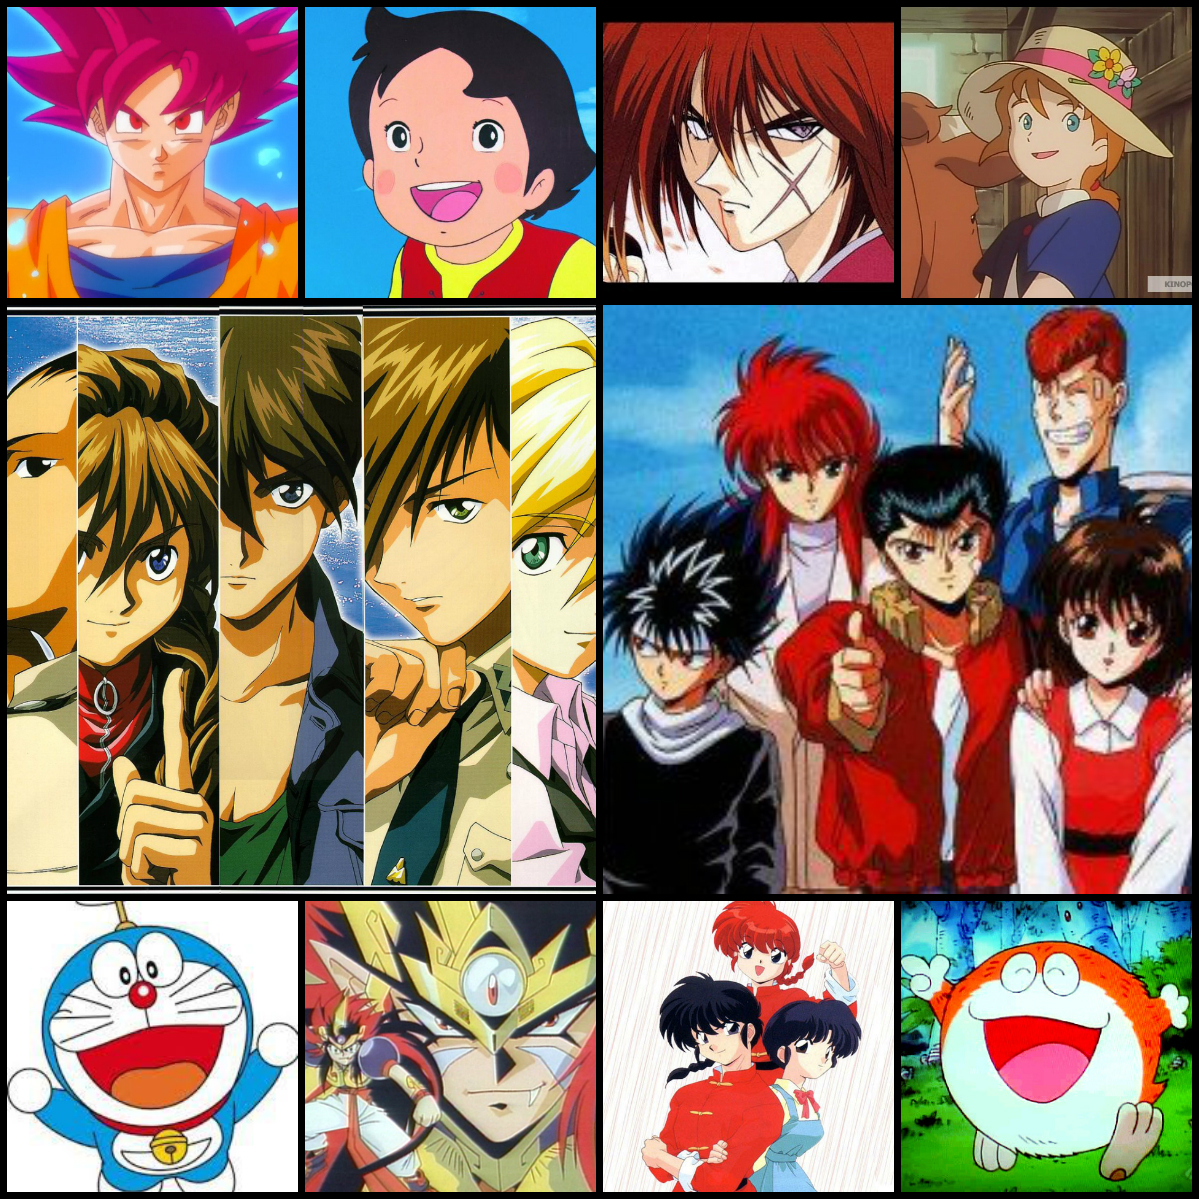 10 anime shows that every '90s kid grew up watching over and over again